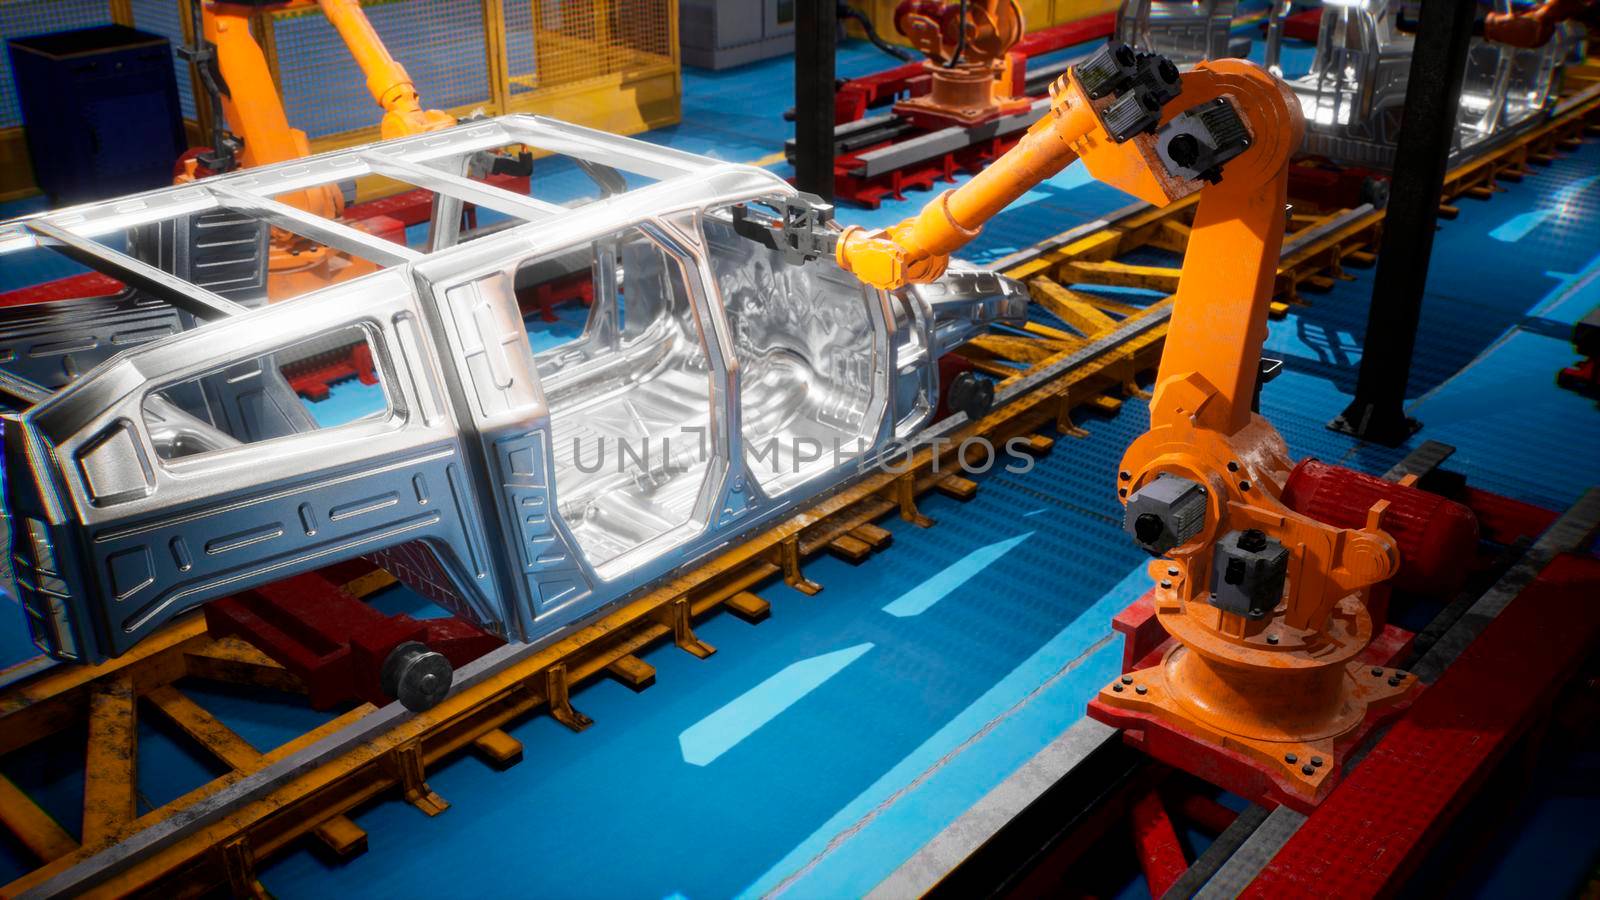 Car welding line of conveyor with frameworks of unfinished cars and robots welders.